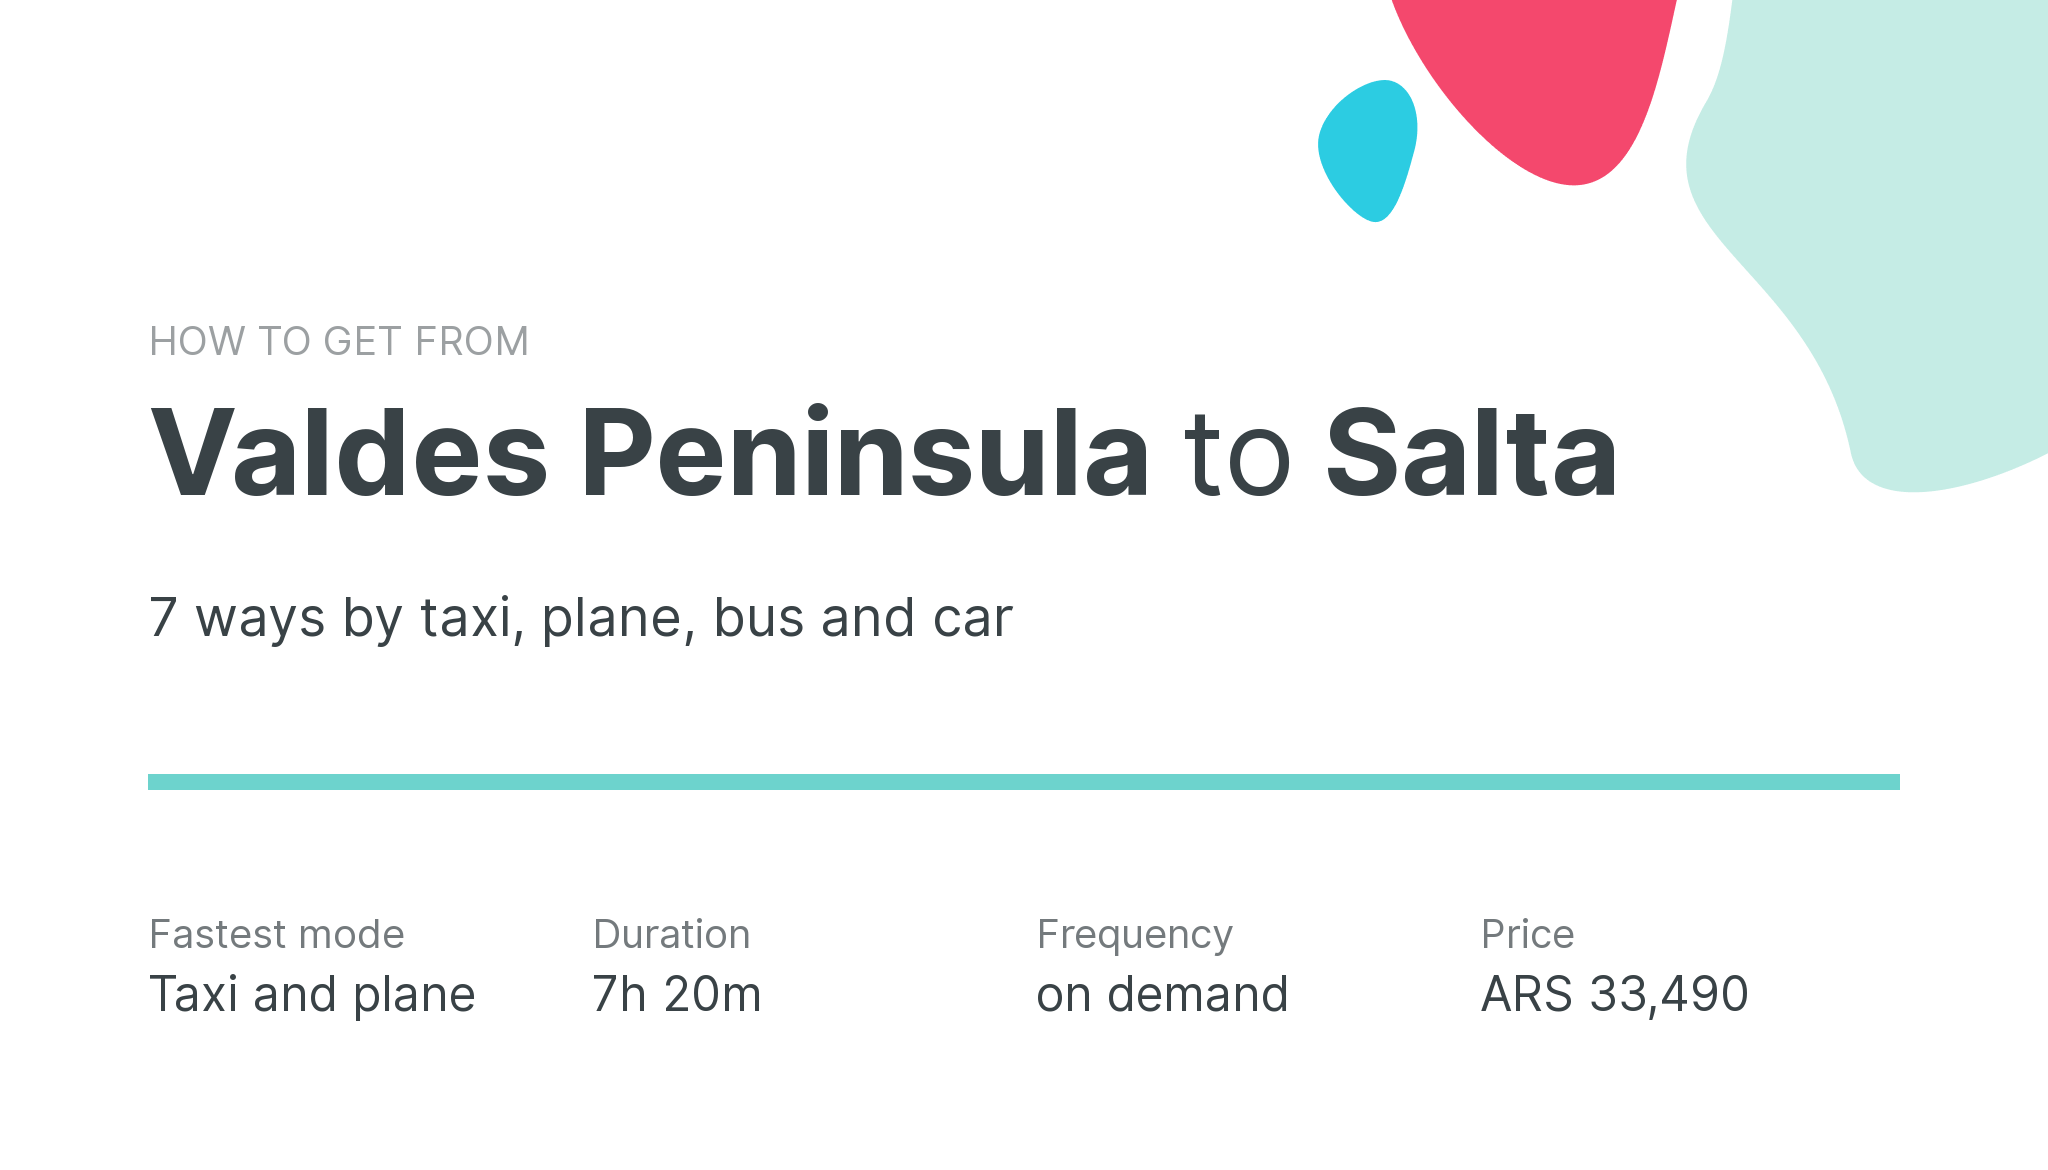 How do I get from Valdes Peninsula to Salta